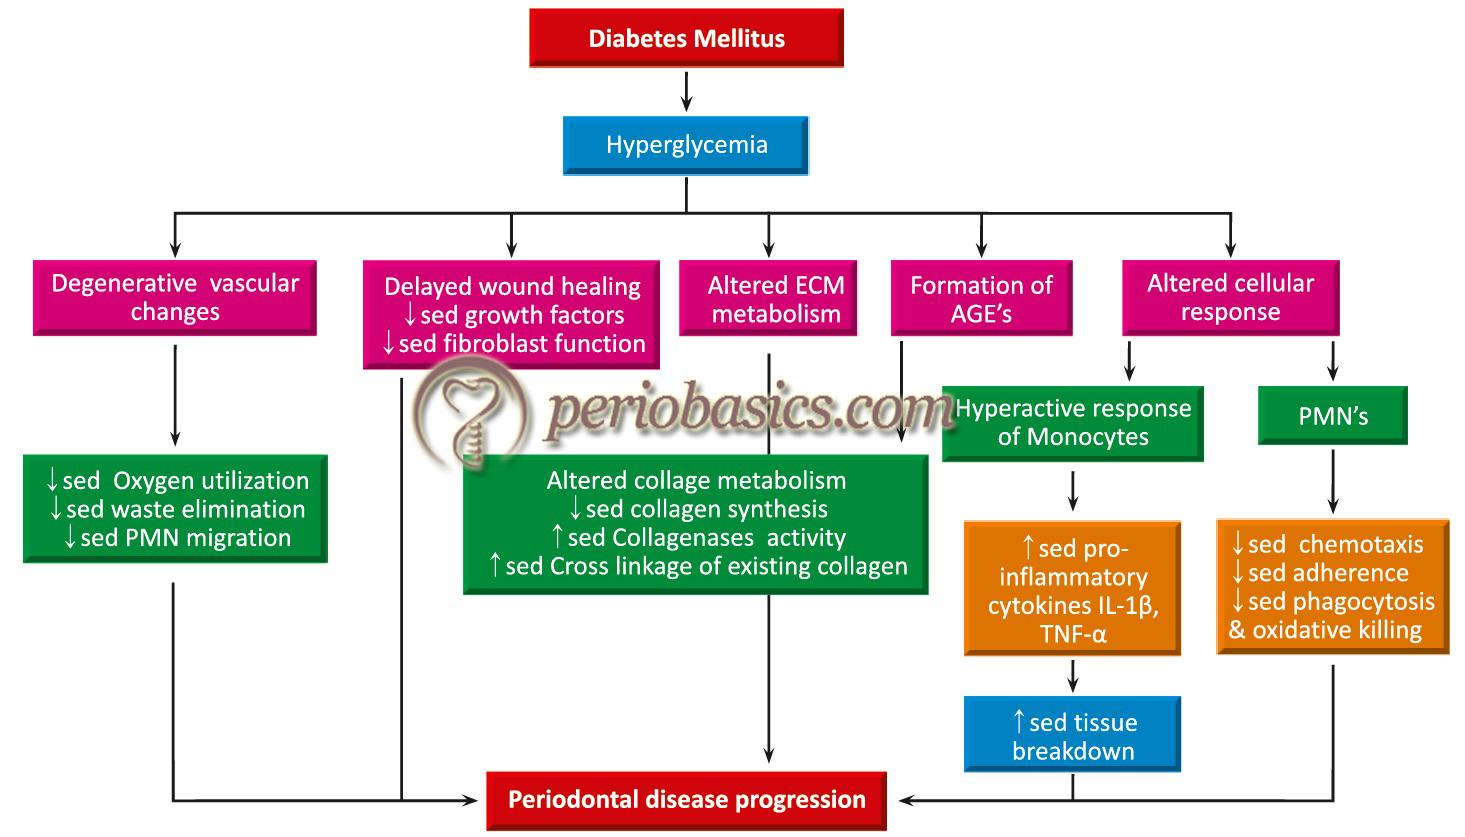 Various vascular, metabolic and immunological effects of hyperglycemia in diabetes mellitus and their association with periodontal disease progression.